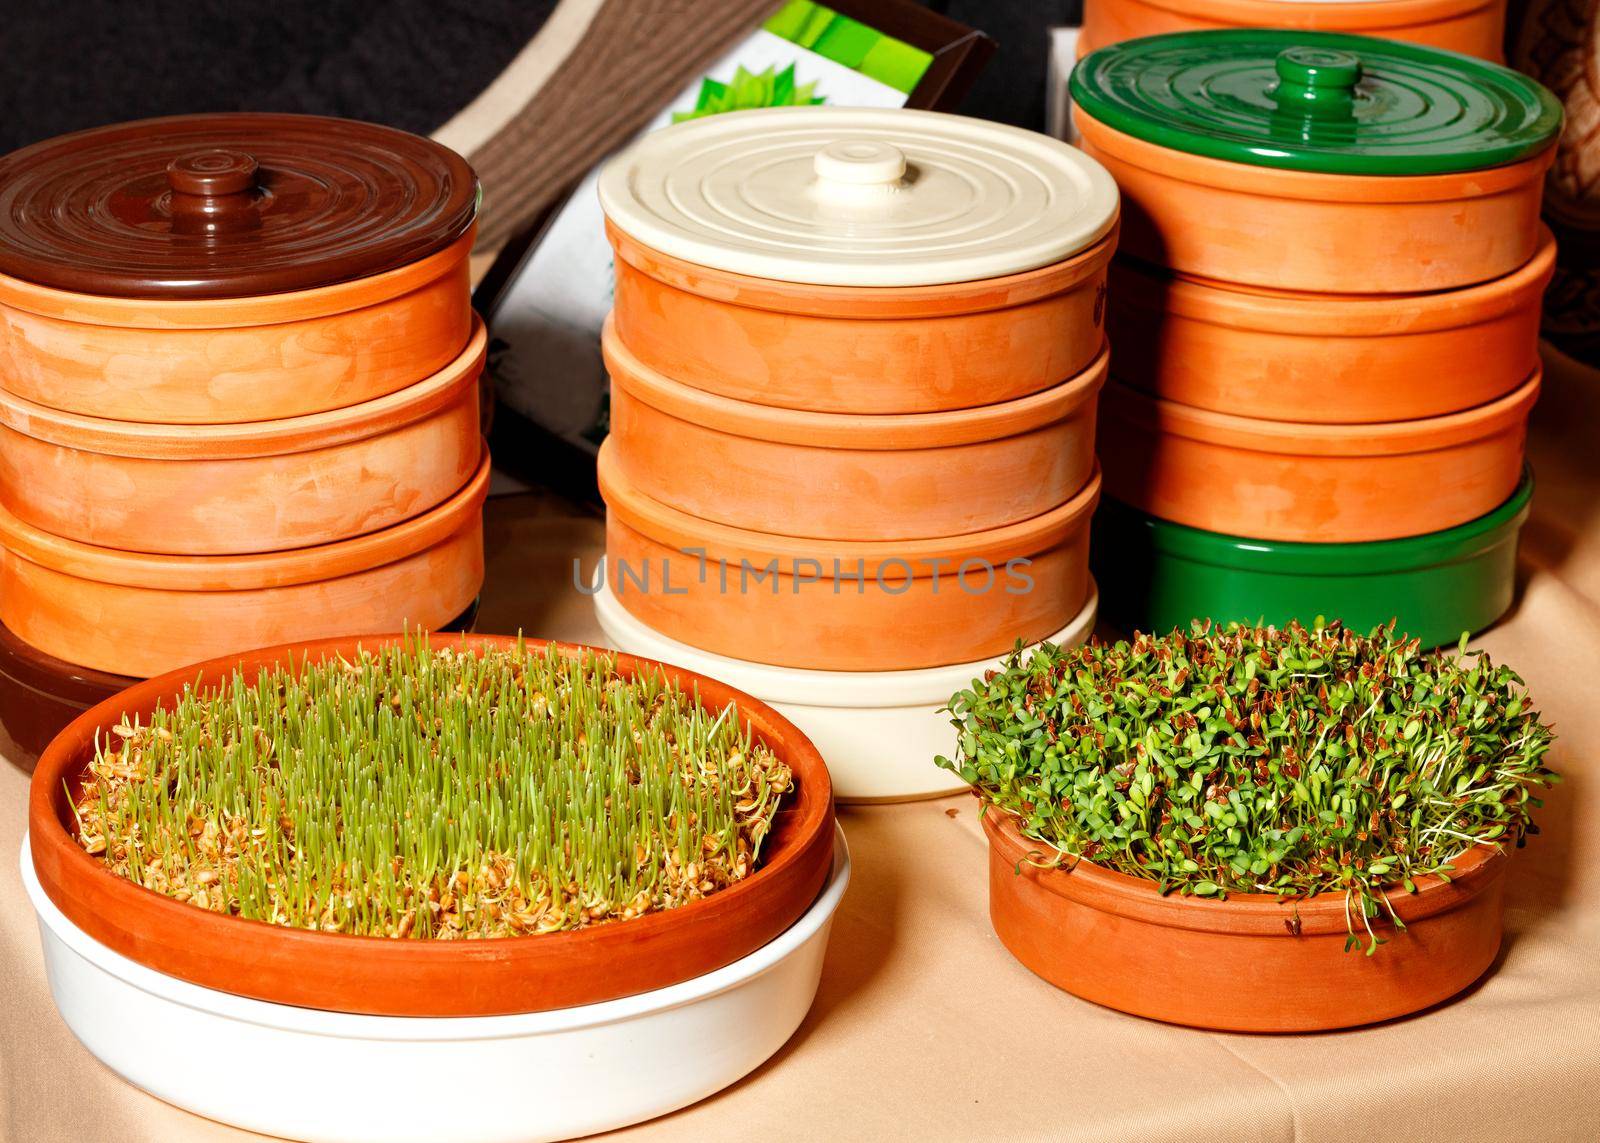 Green wheat sprouts and legumes in special clay containers, fitness diet, healthy diet, natural, close-up.